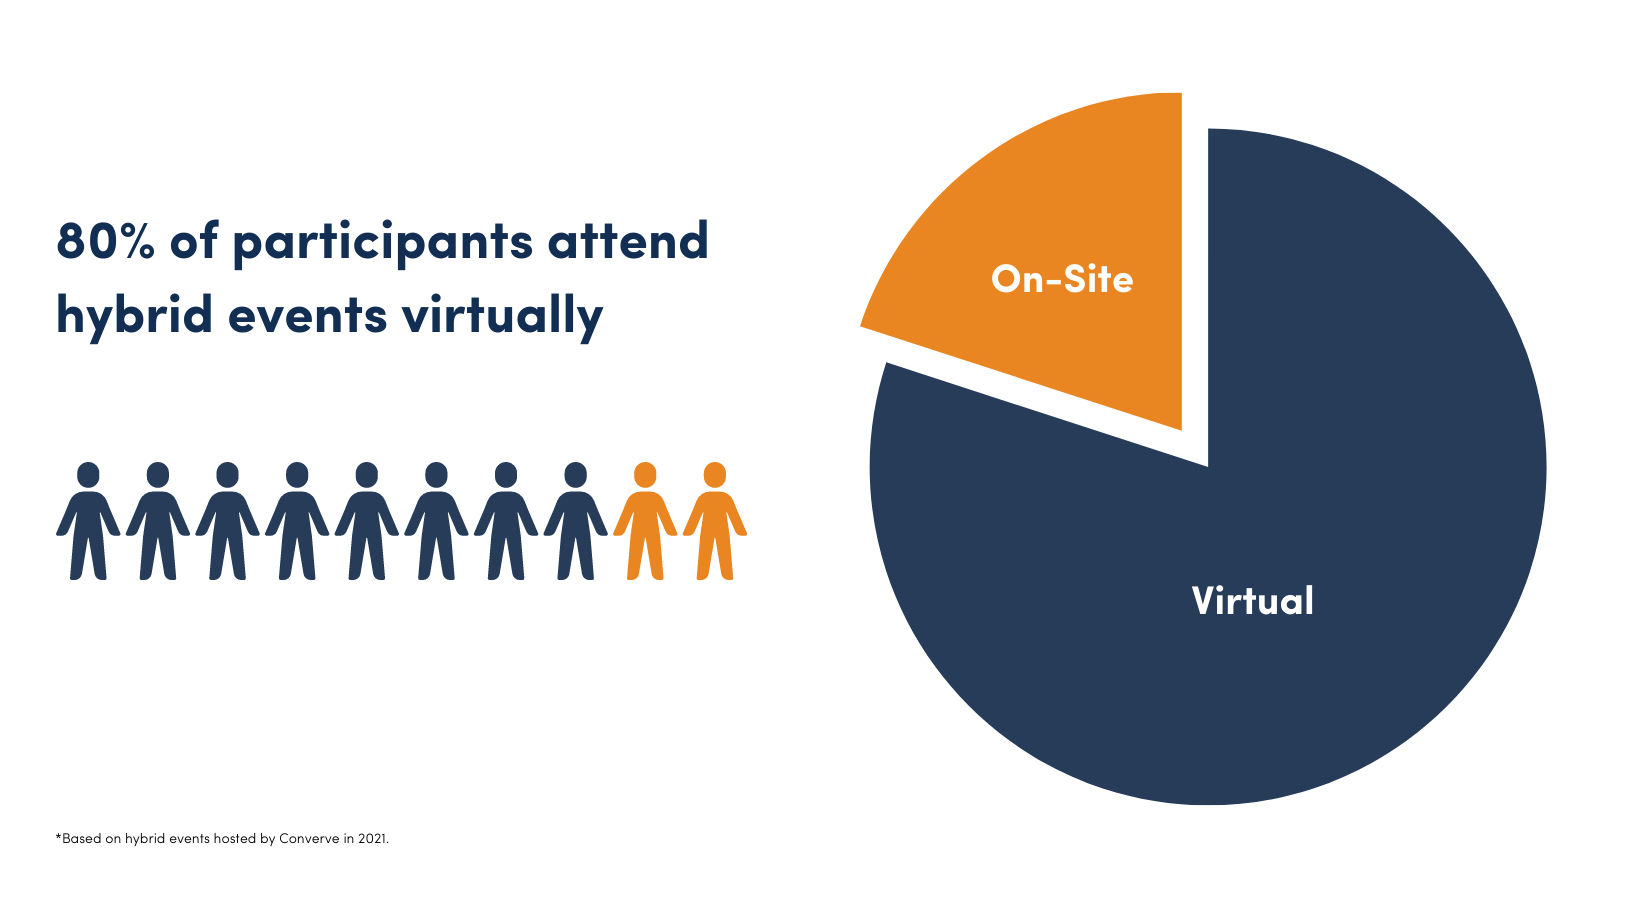 Hybrid Events: How many participants attend per event